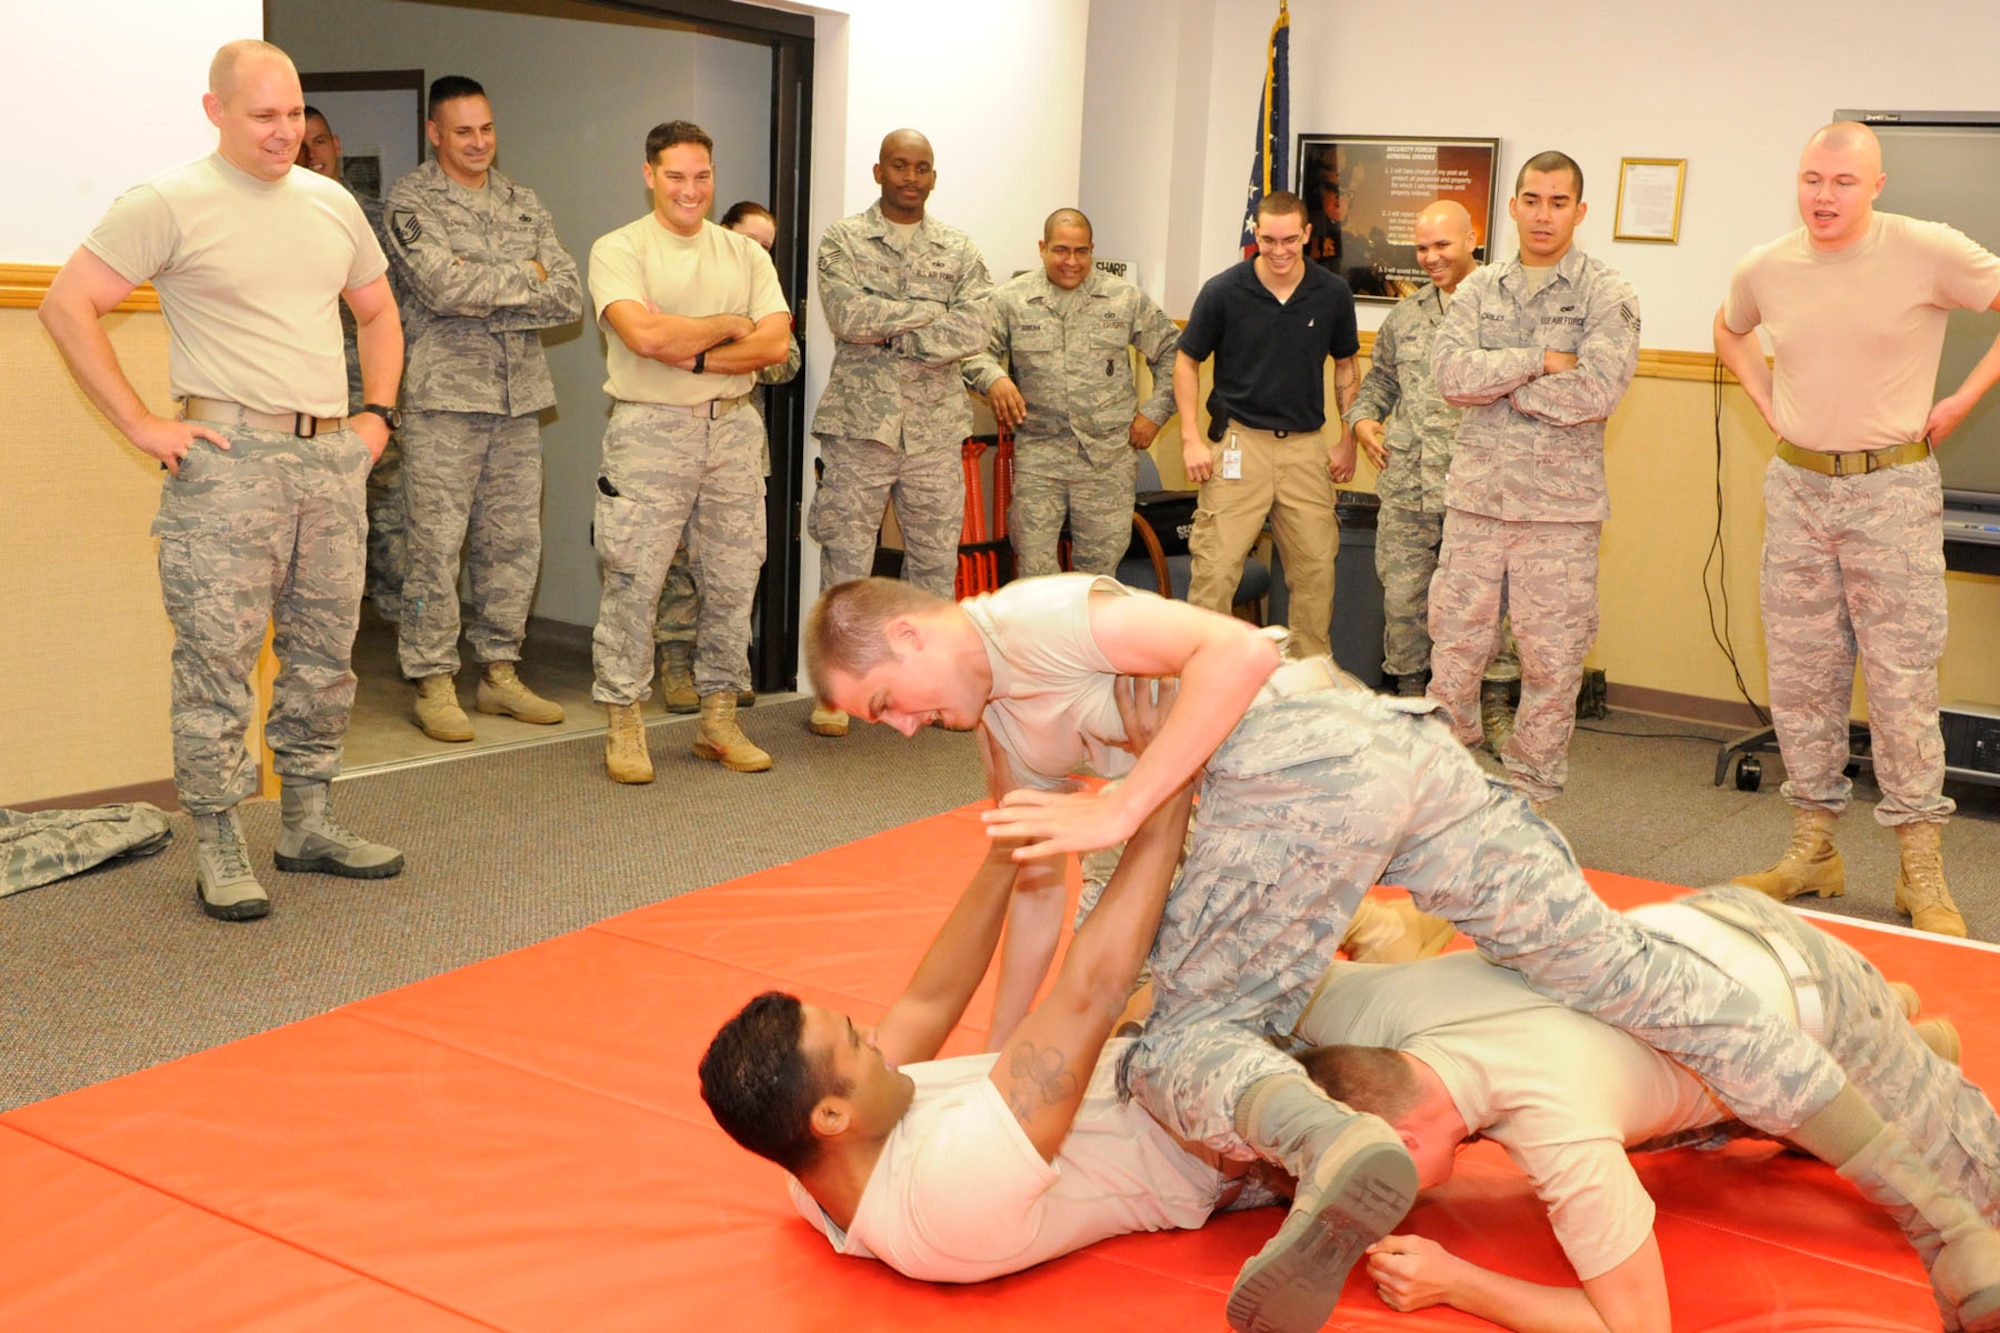 Members of the 65th Security Forces Squadron practice combatives while Chief Dennis Vannorsdall, 3rd Air Force Command Chief Master Sgt. (far left), looks on with other SFS members during a pre-TDY training at Lajes Field, Oct. 12, 2010.  Combative training techniques are useful to military members when in hand-to-hand combat.  This specialized training includes verbal judo and self-defense.  
(U. S. Photo by Guido Melo)